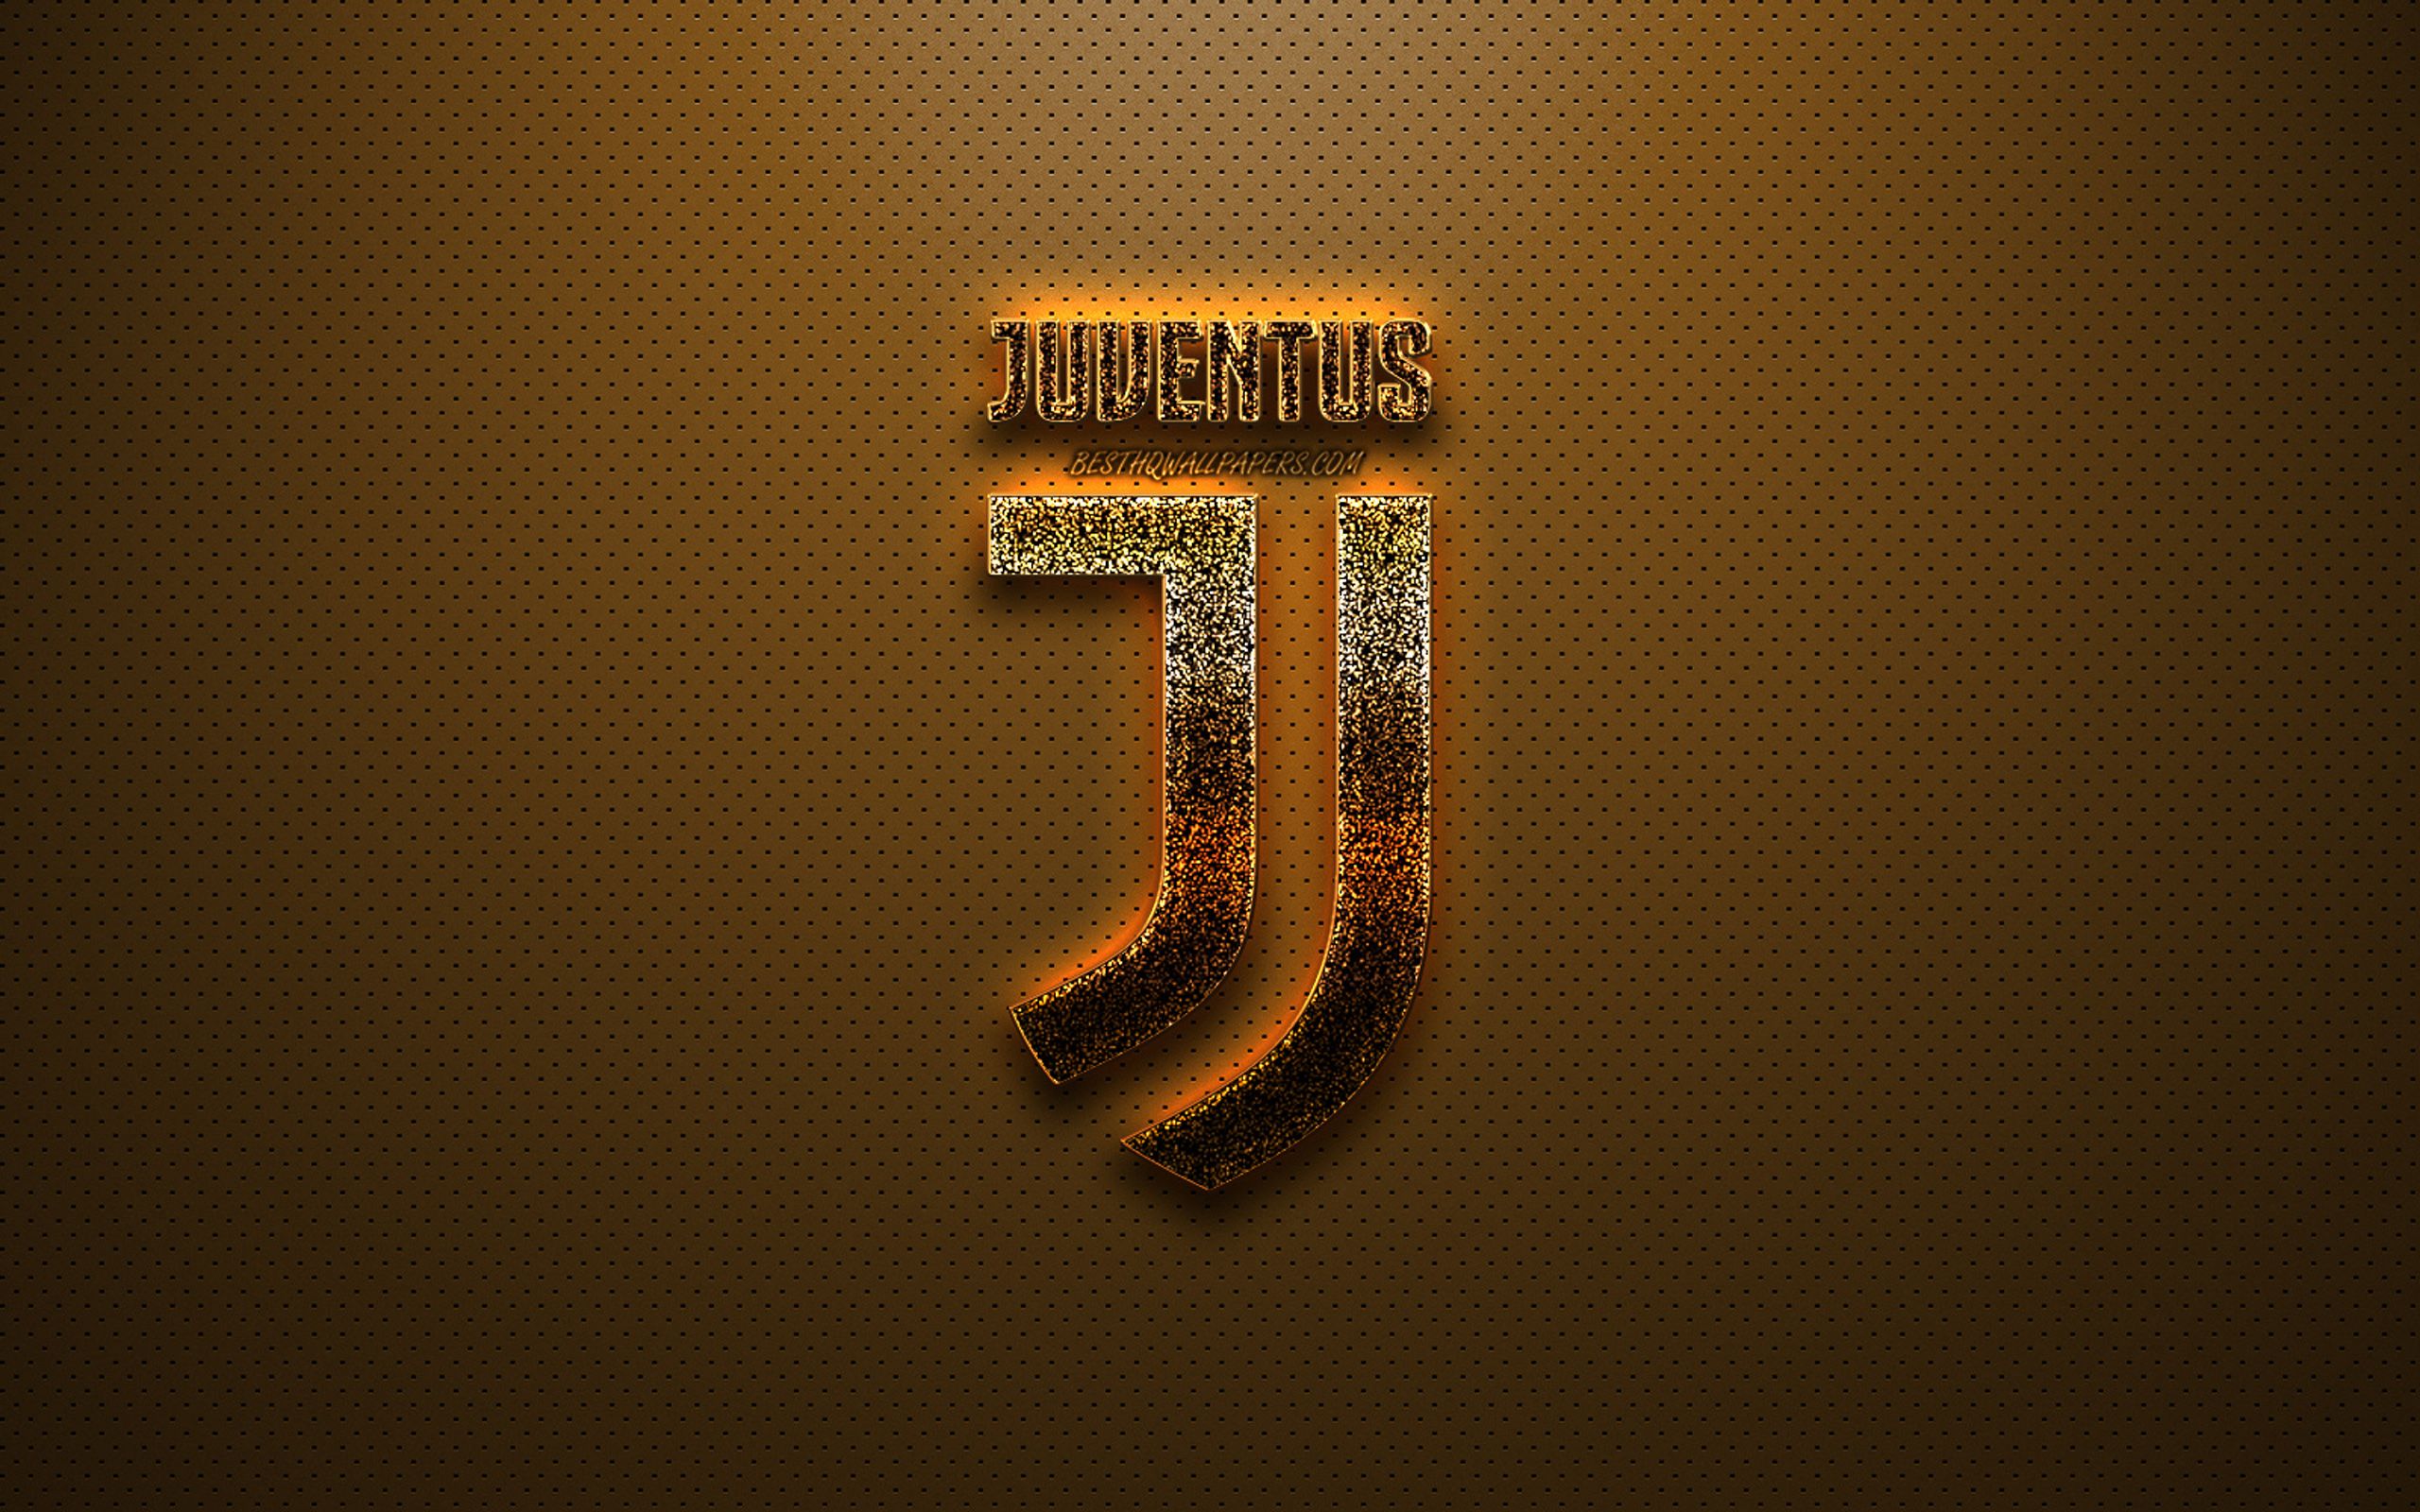 Download wallpaper Juventus FC, Italian football club, Turin, Italy, Juventus gold glitter logo, emblem, Serie A, Juventus logo, golden background for desktop with resolution 2560x1600. High Quality HD picture wallpaper